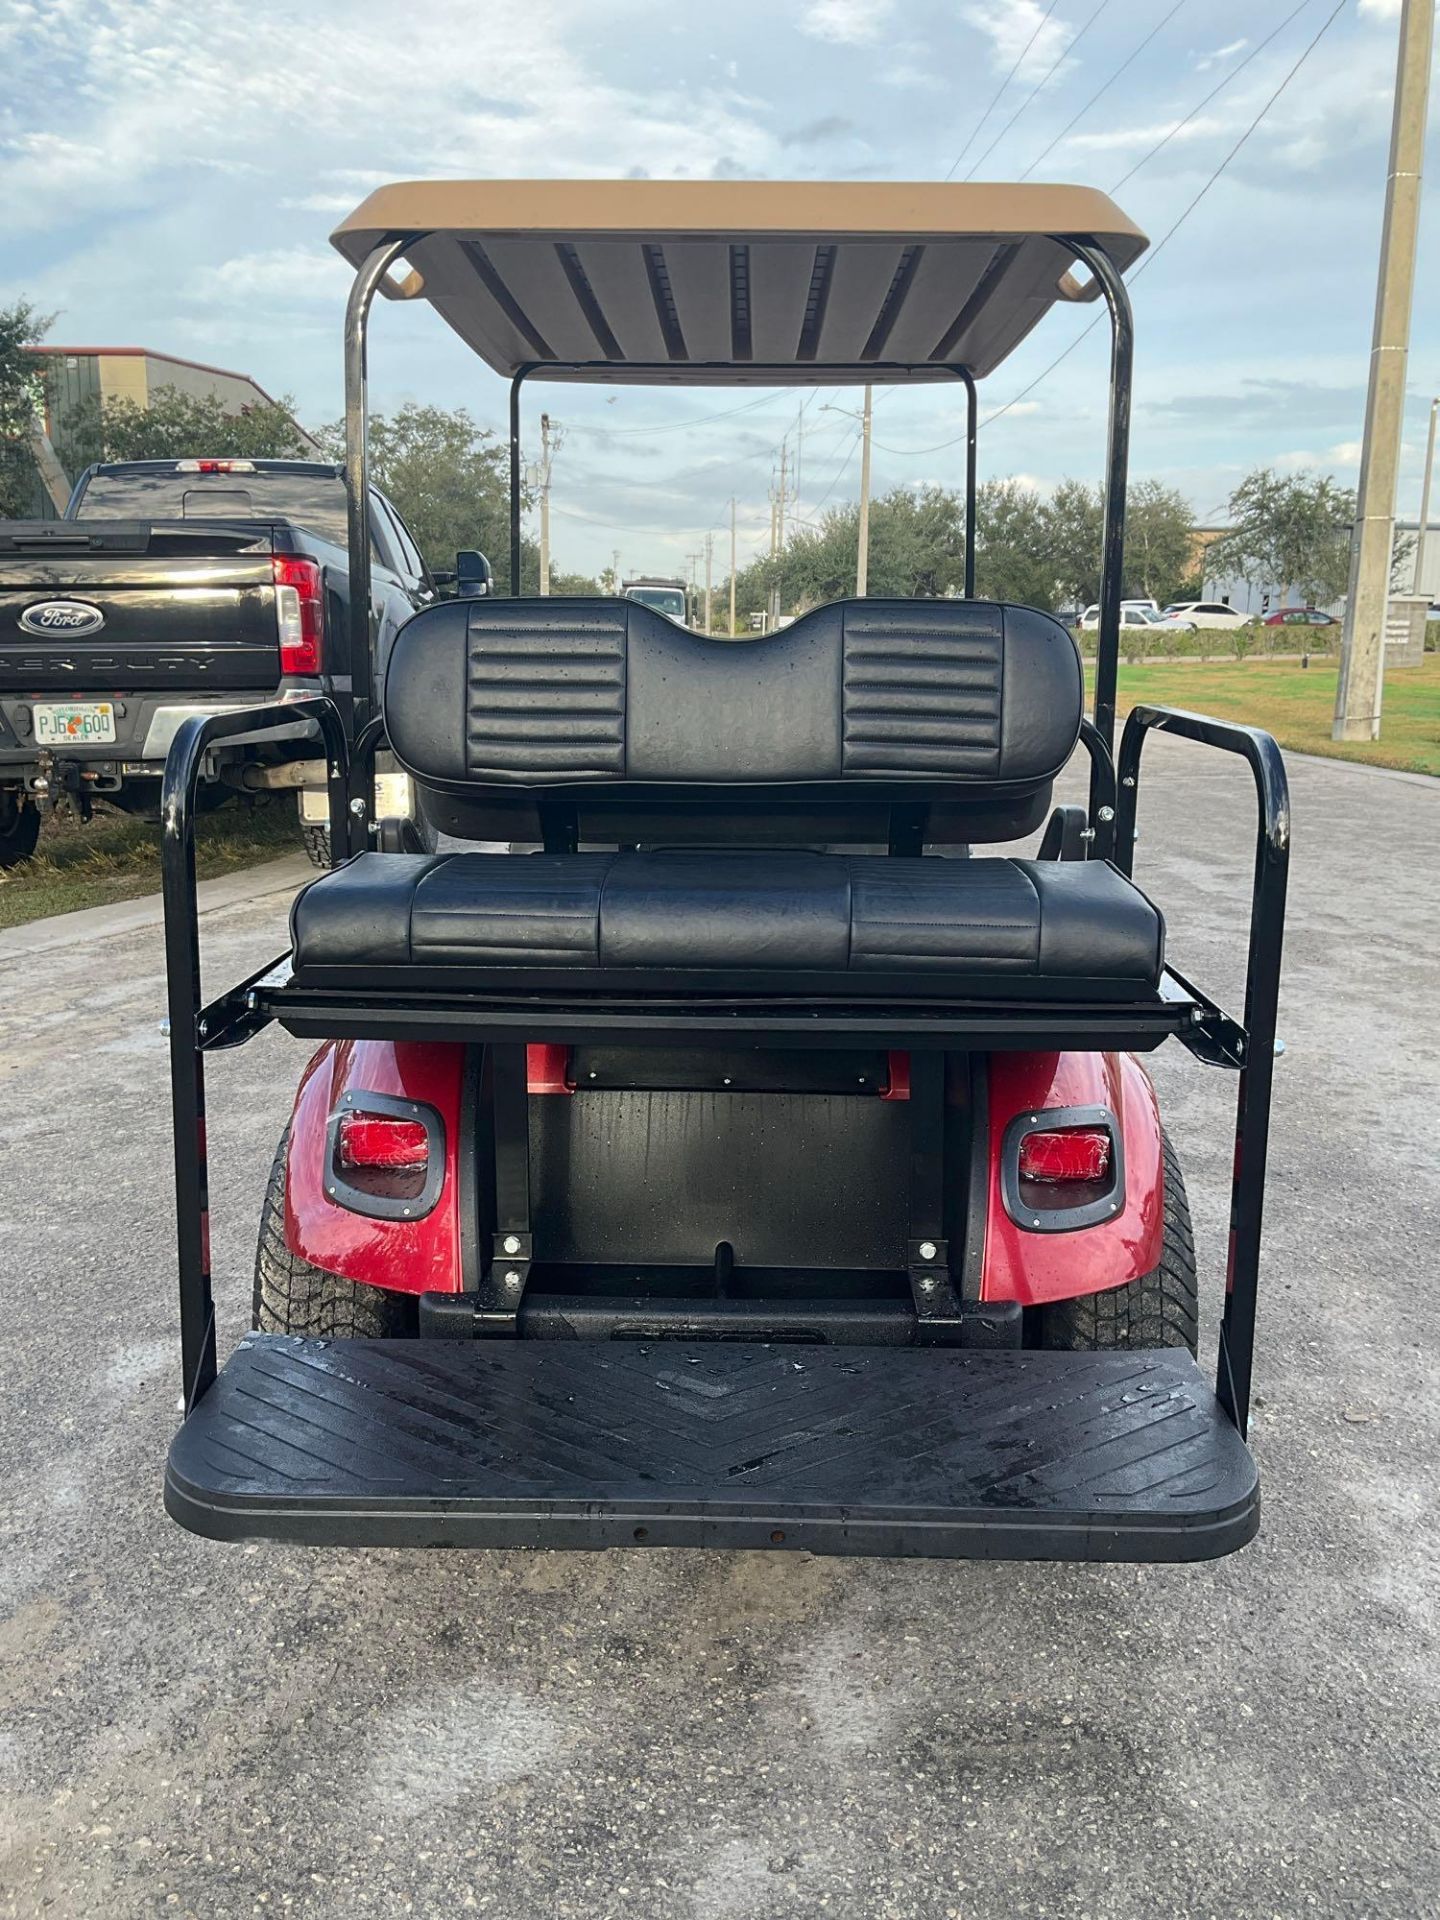 EZ-GO GOLF CART , ELECTRIC, BACK SEAT FOLD DOWN TO FLAT BED, BATTERY CHARGER INCLUDED, BILL OF SALE - Image 4 of 13